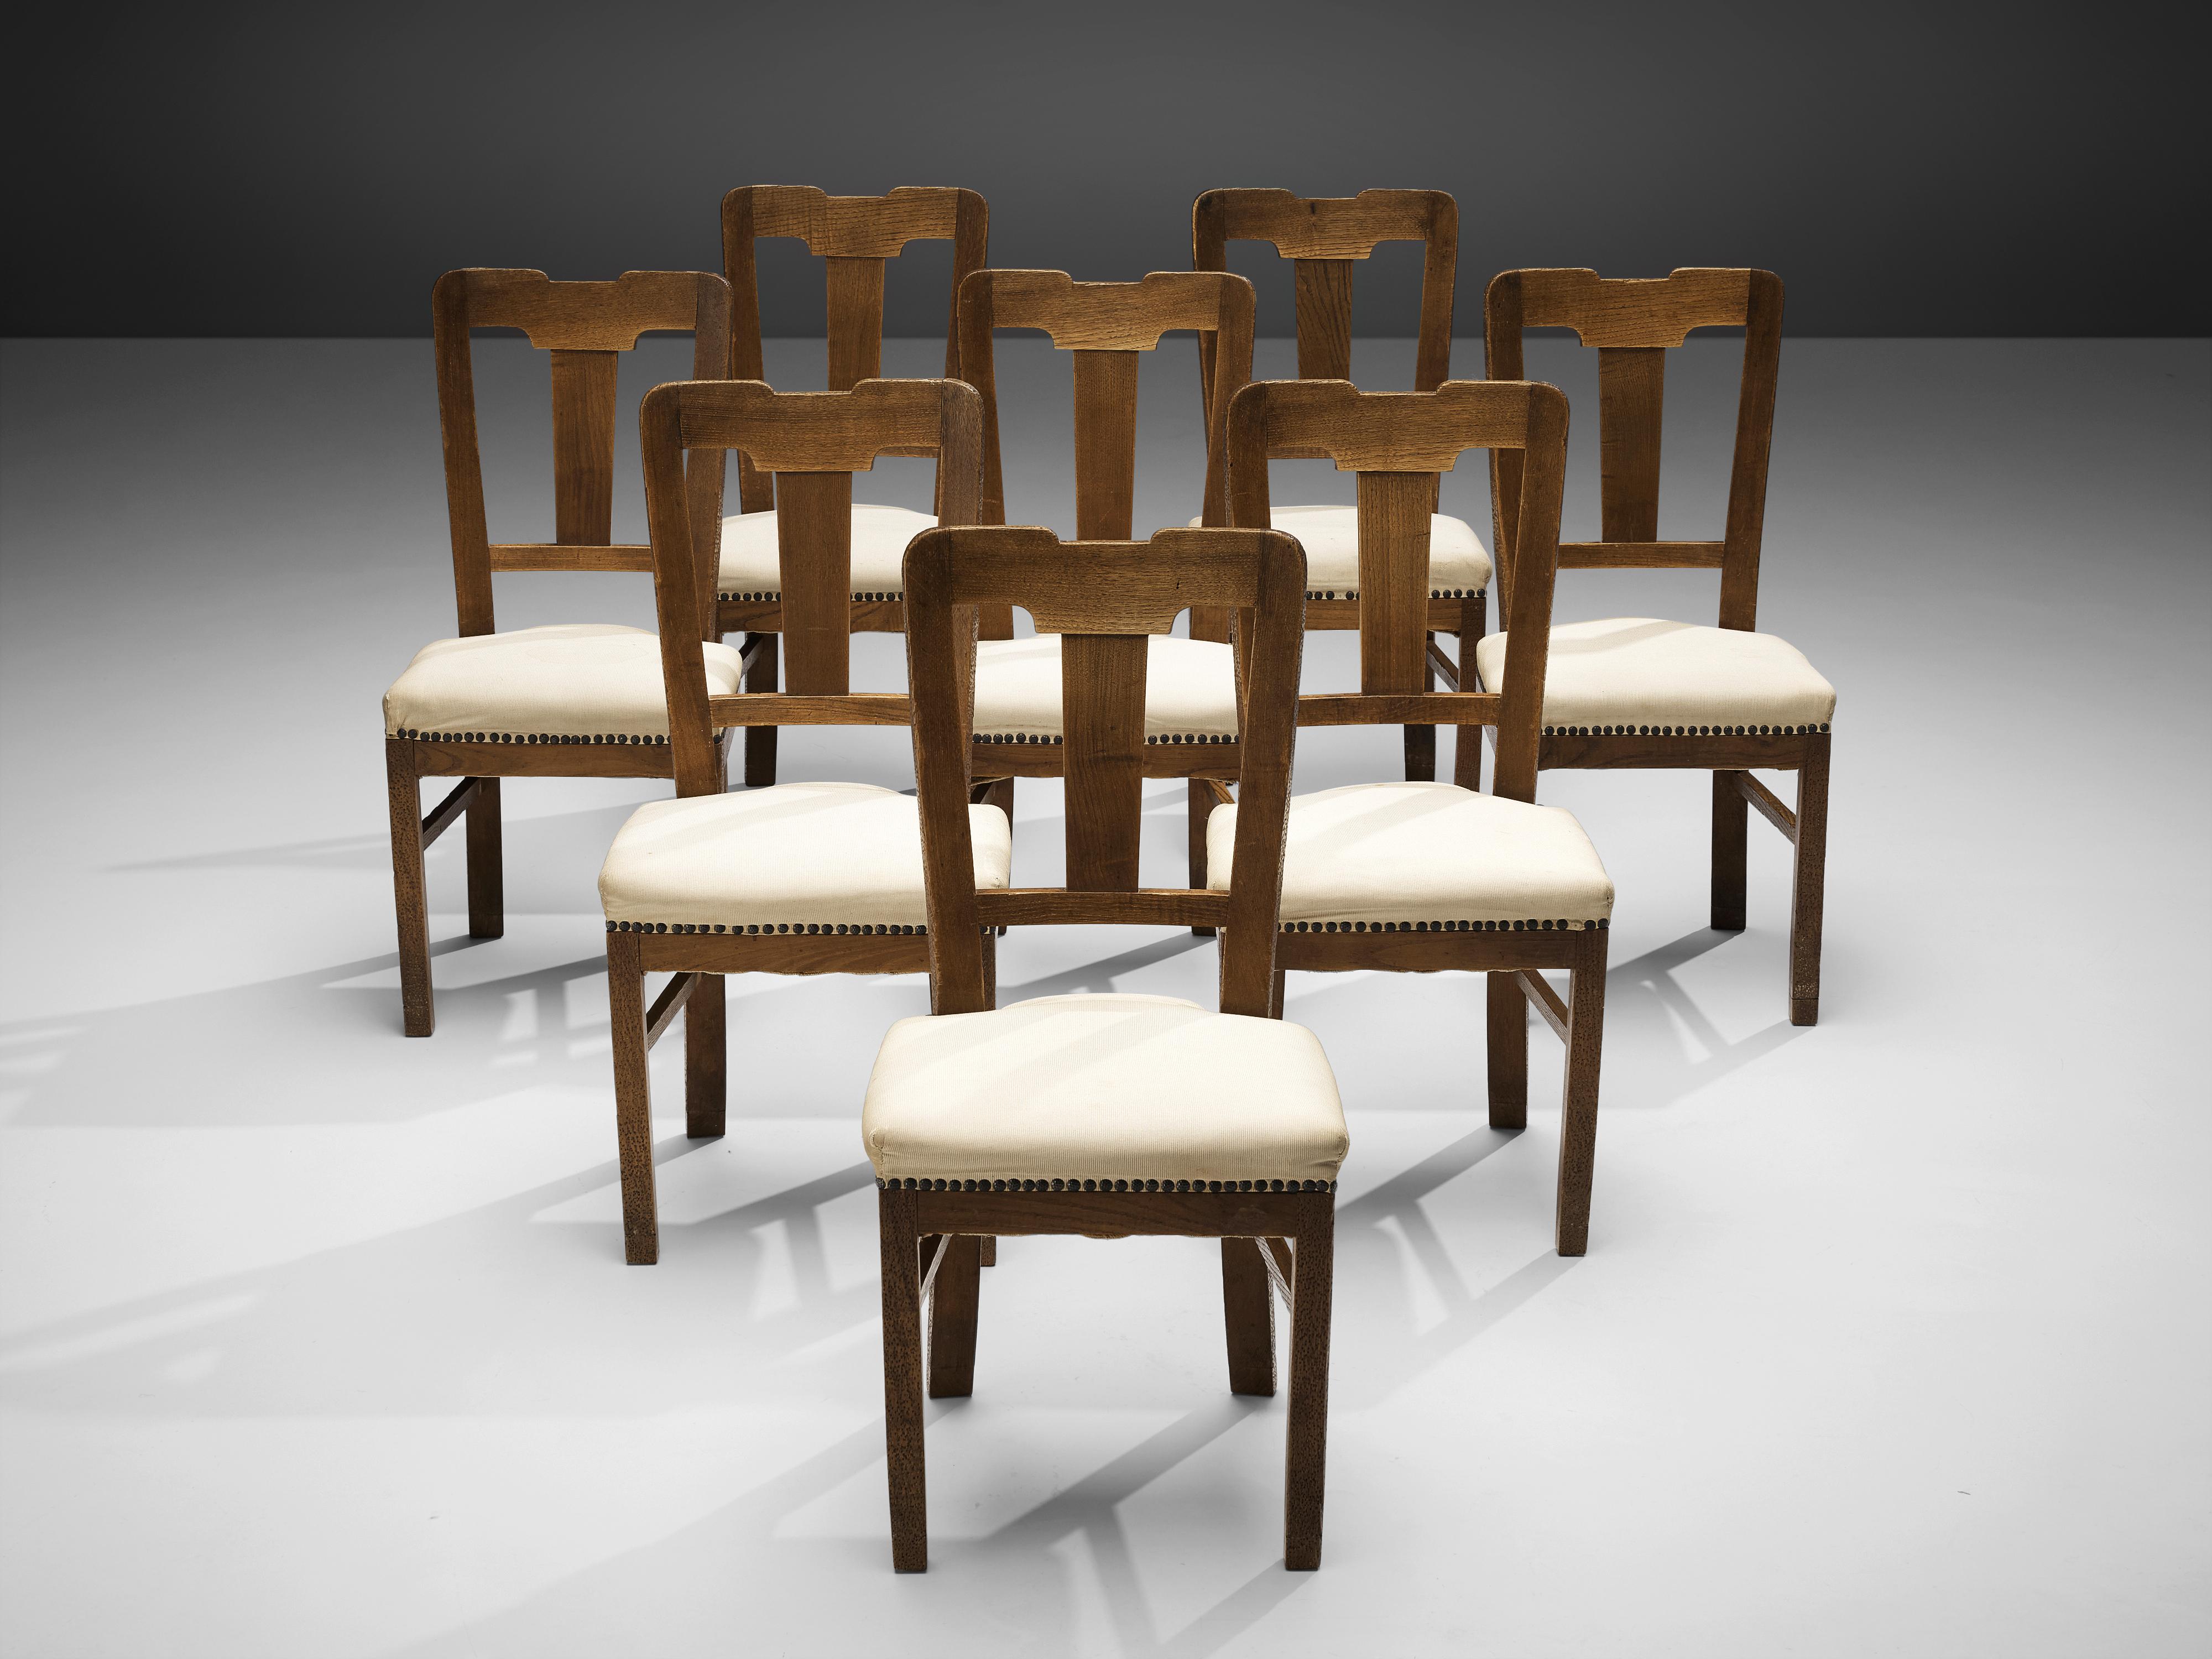 Ernesto Valabrega, set of eight dining chairs, stained oak, fabric upholstery, Italy, ca. 1935

This set of dining chairs by Ernesto Valabrega not only shows a well-balanced backrest but also lovely details like the brass nails holding the seating